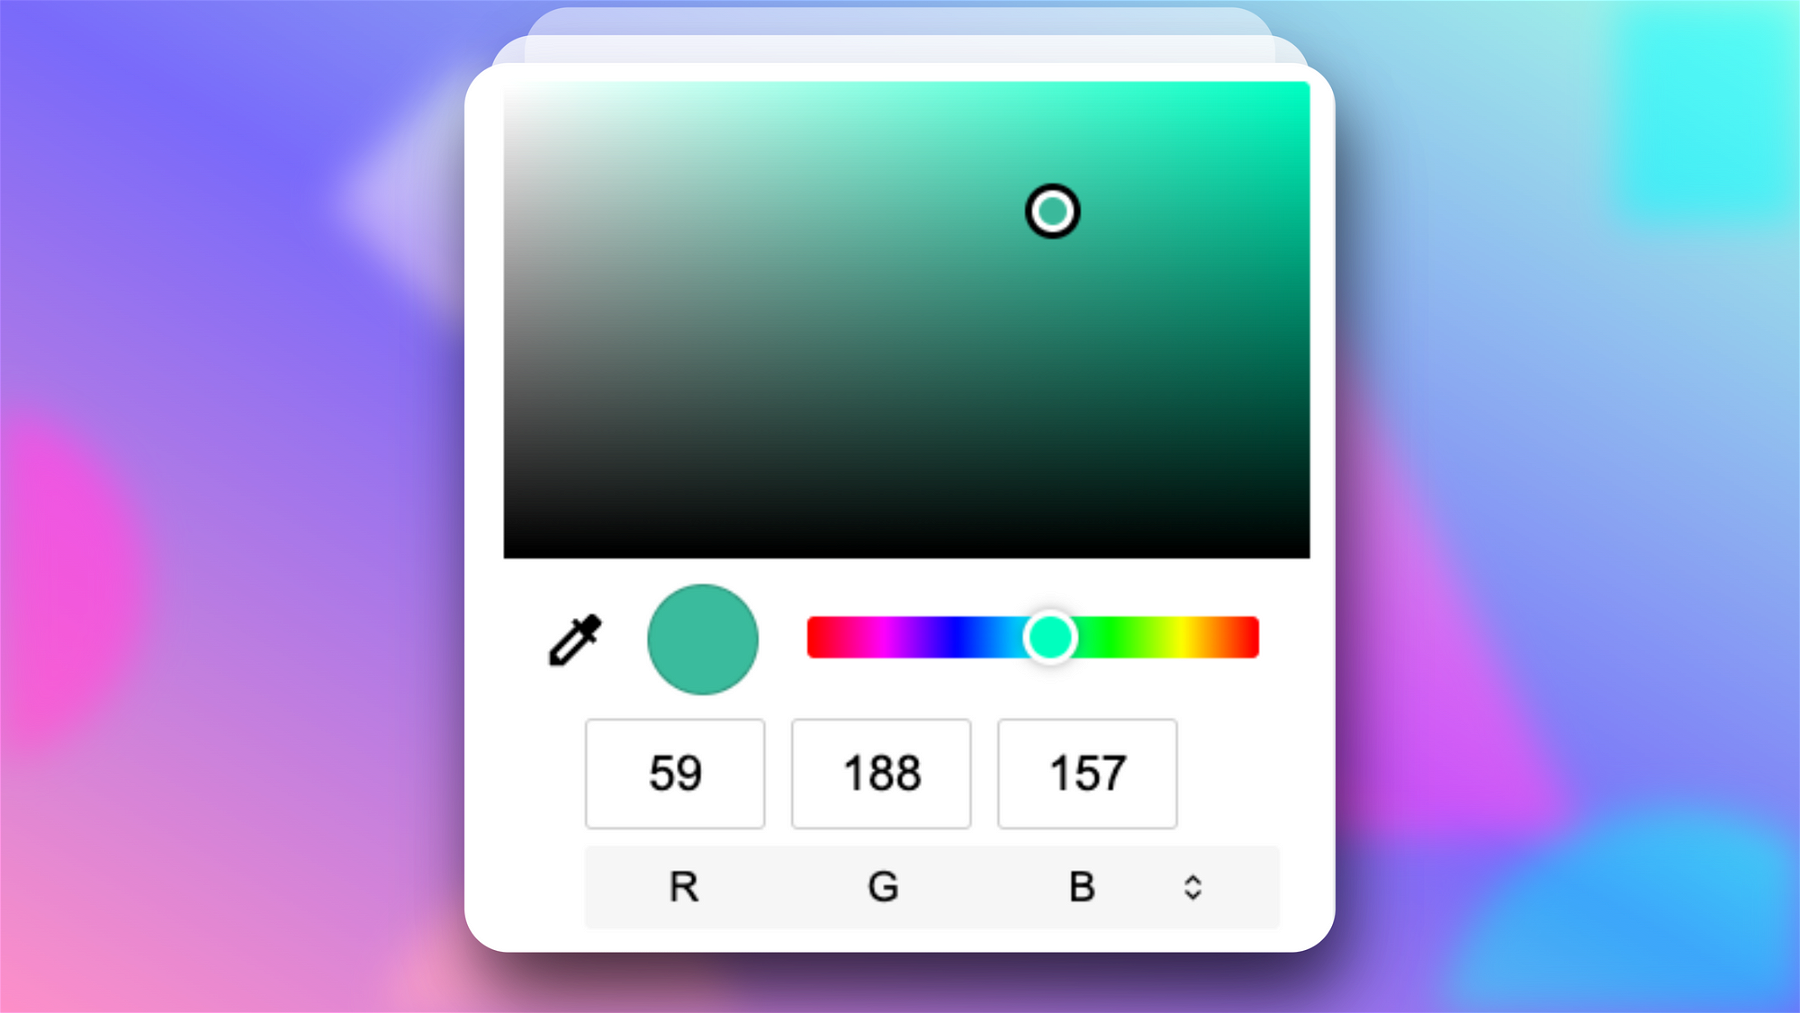 By default, the color picker will be set in RGB mode. You can hover over the bottom part of the color picker and click to change through different color modes: RGB, HSL, and HEX.